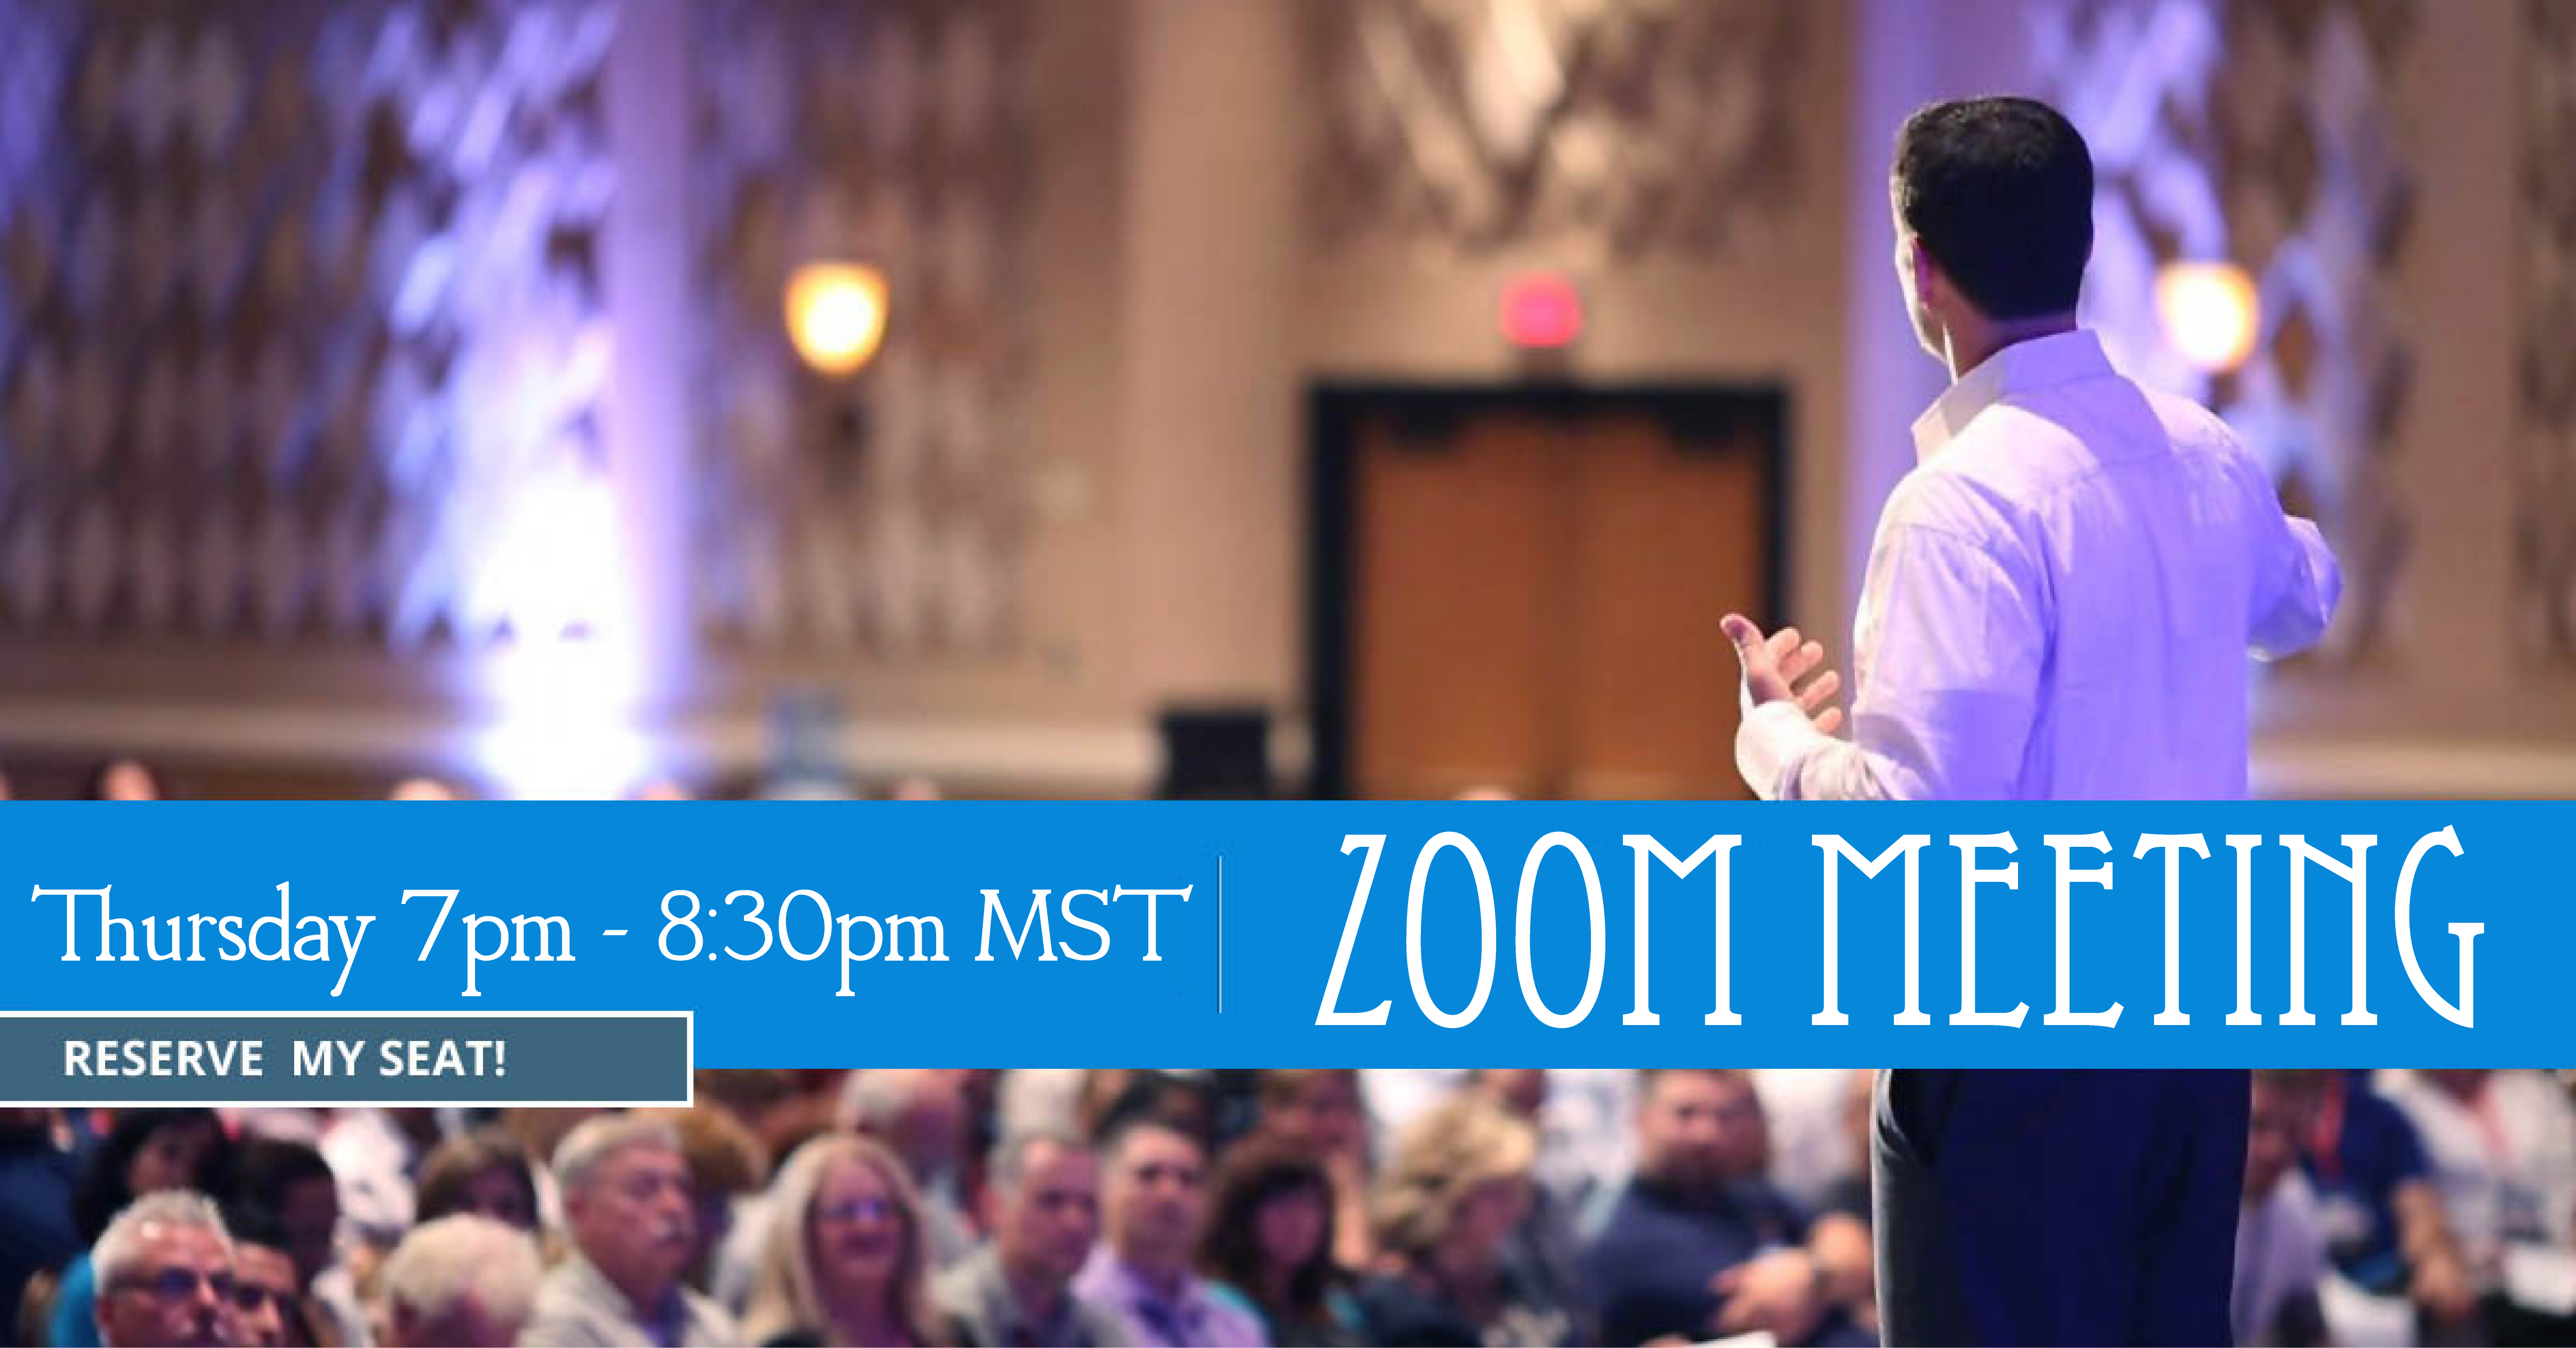 Local Real Estate Investing & Business Training - ZOOM Conference